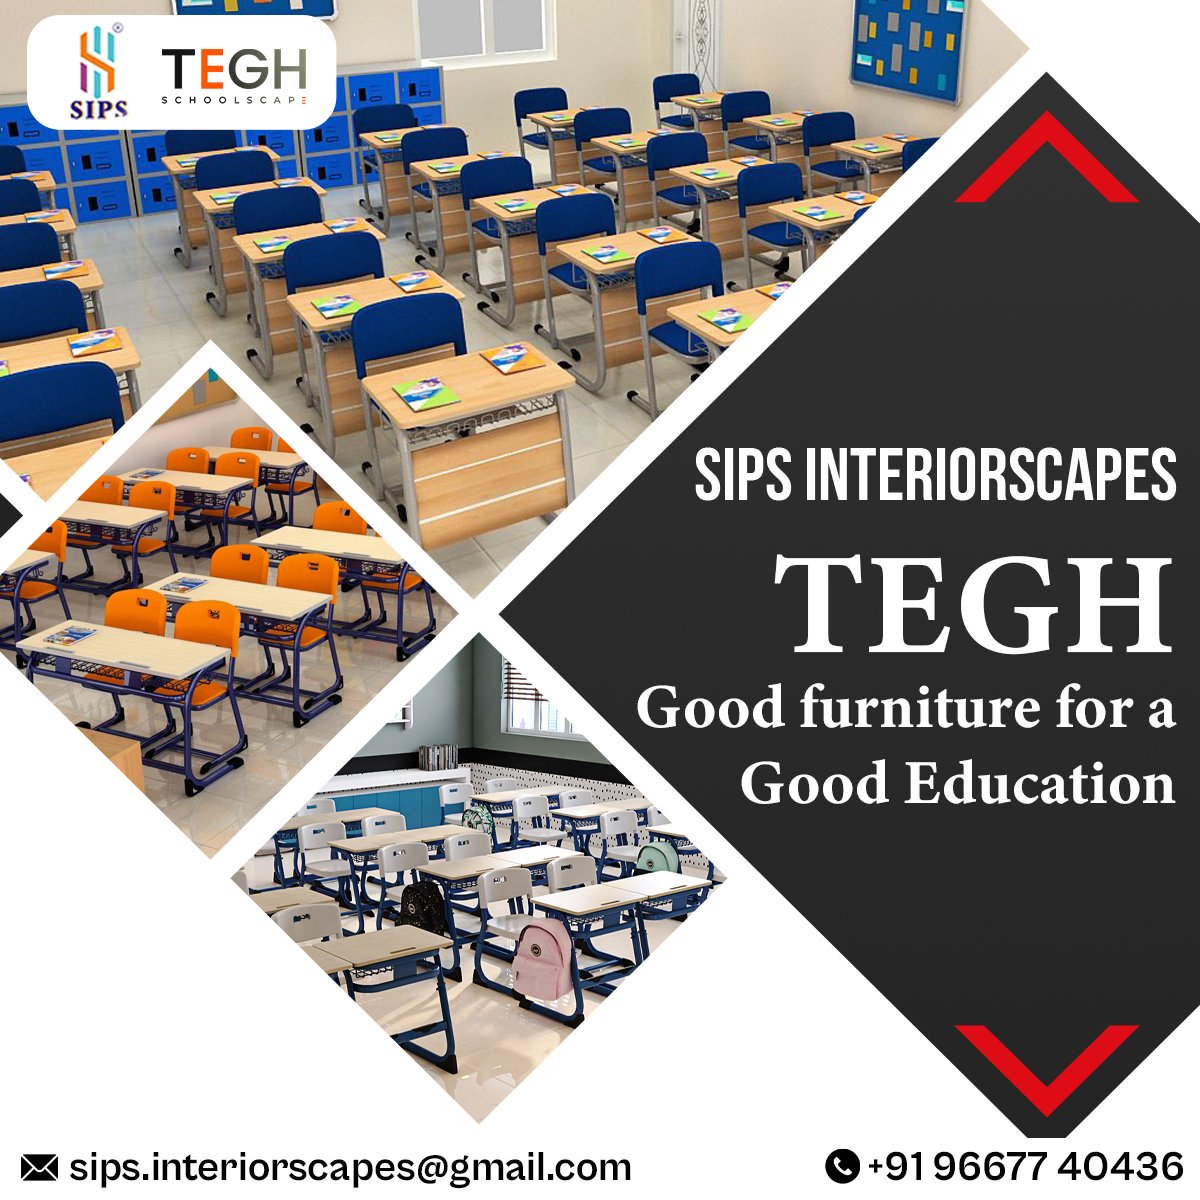 SIPS INTERIORSCAPES
TEGH Good furniture for a Good Education
🌐 sips.interiorscapes@gmail.com
📞+9196677 40436
#hospitalfurniture #italianfurniture #importedfurniture